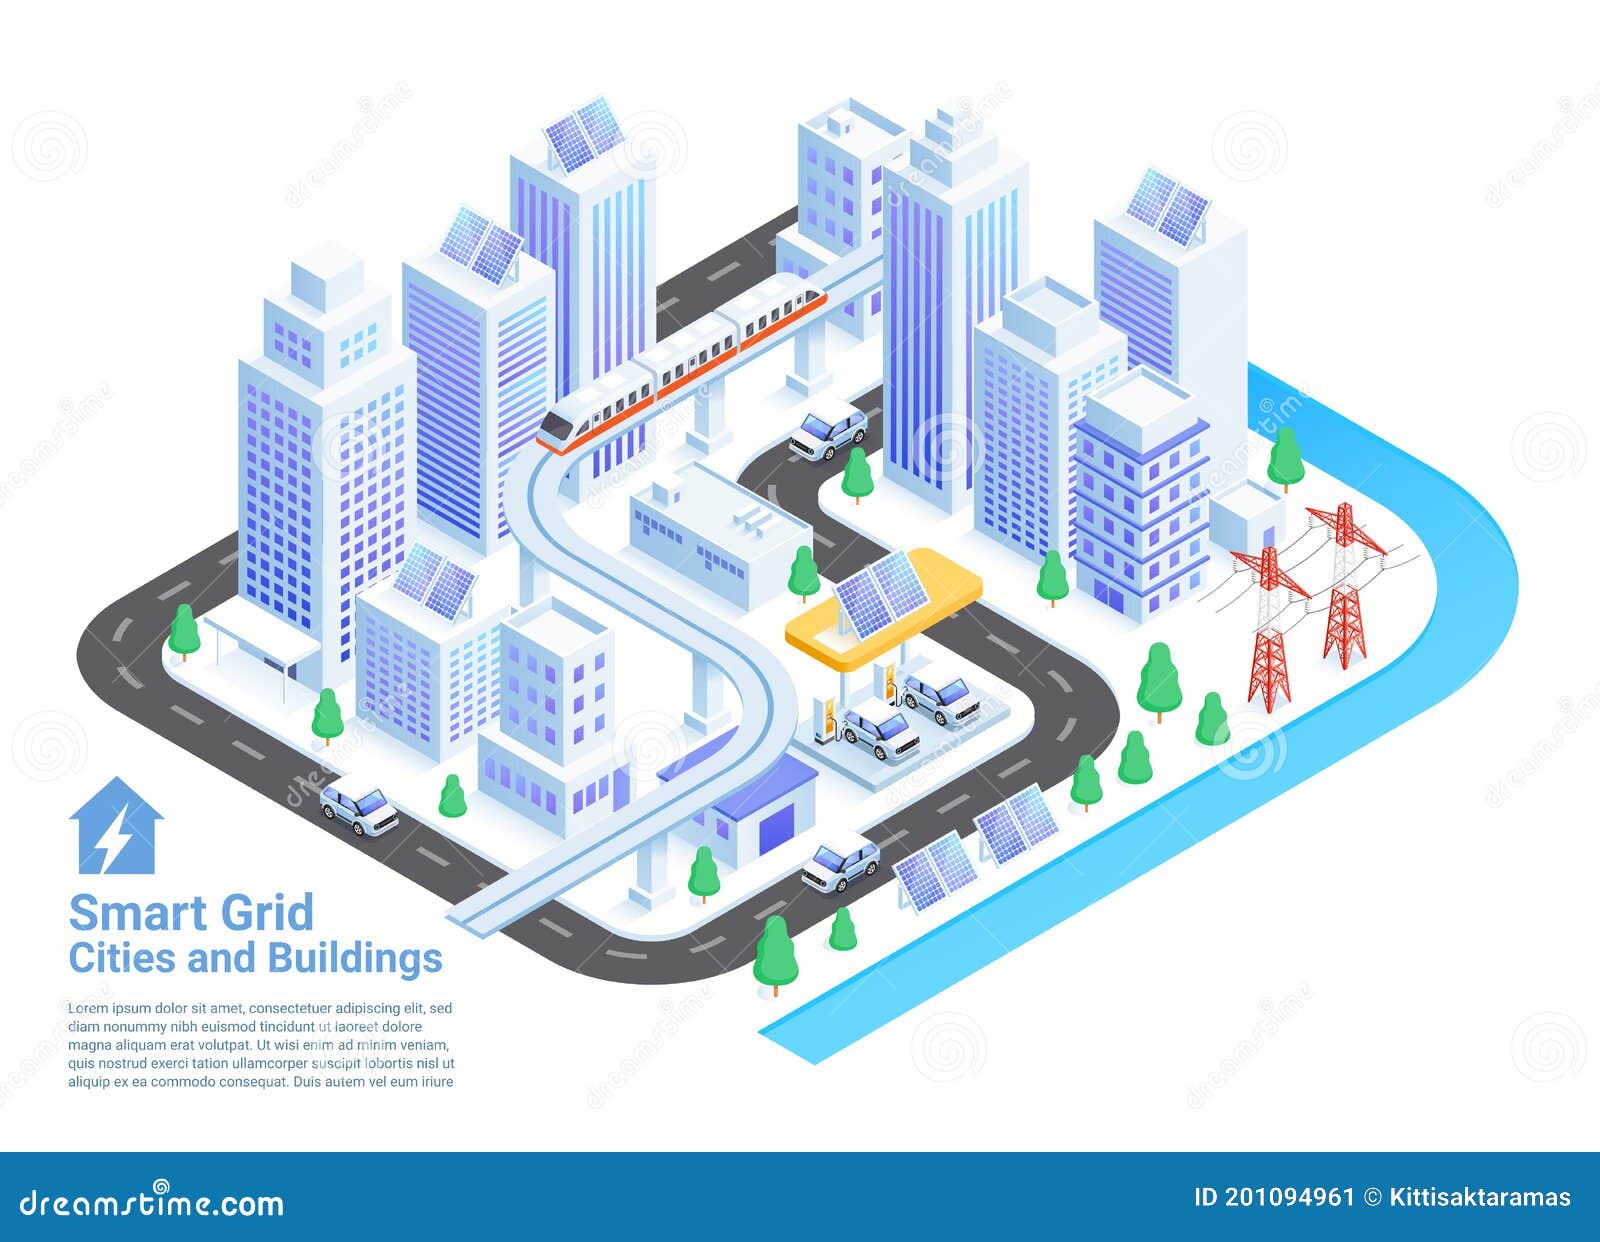 smart grid cities and buildings isometric  s